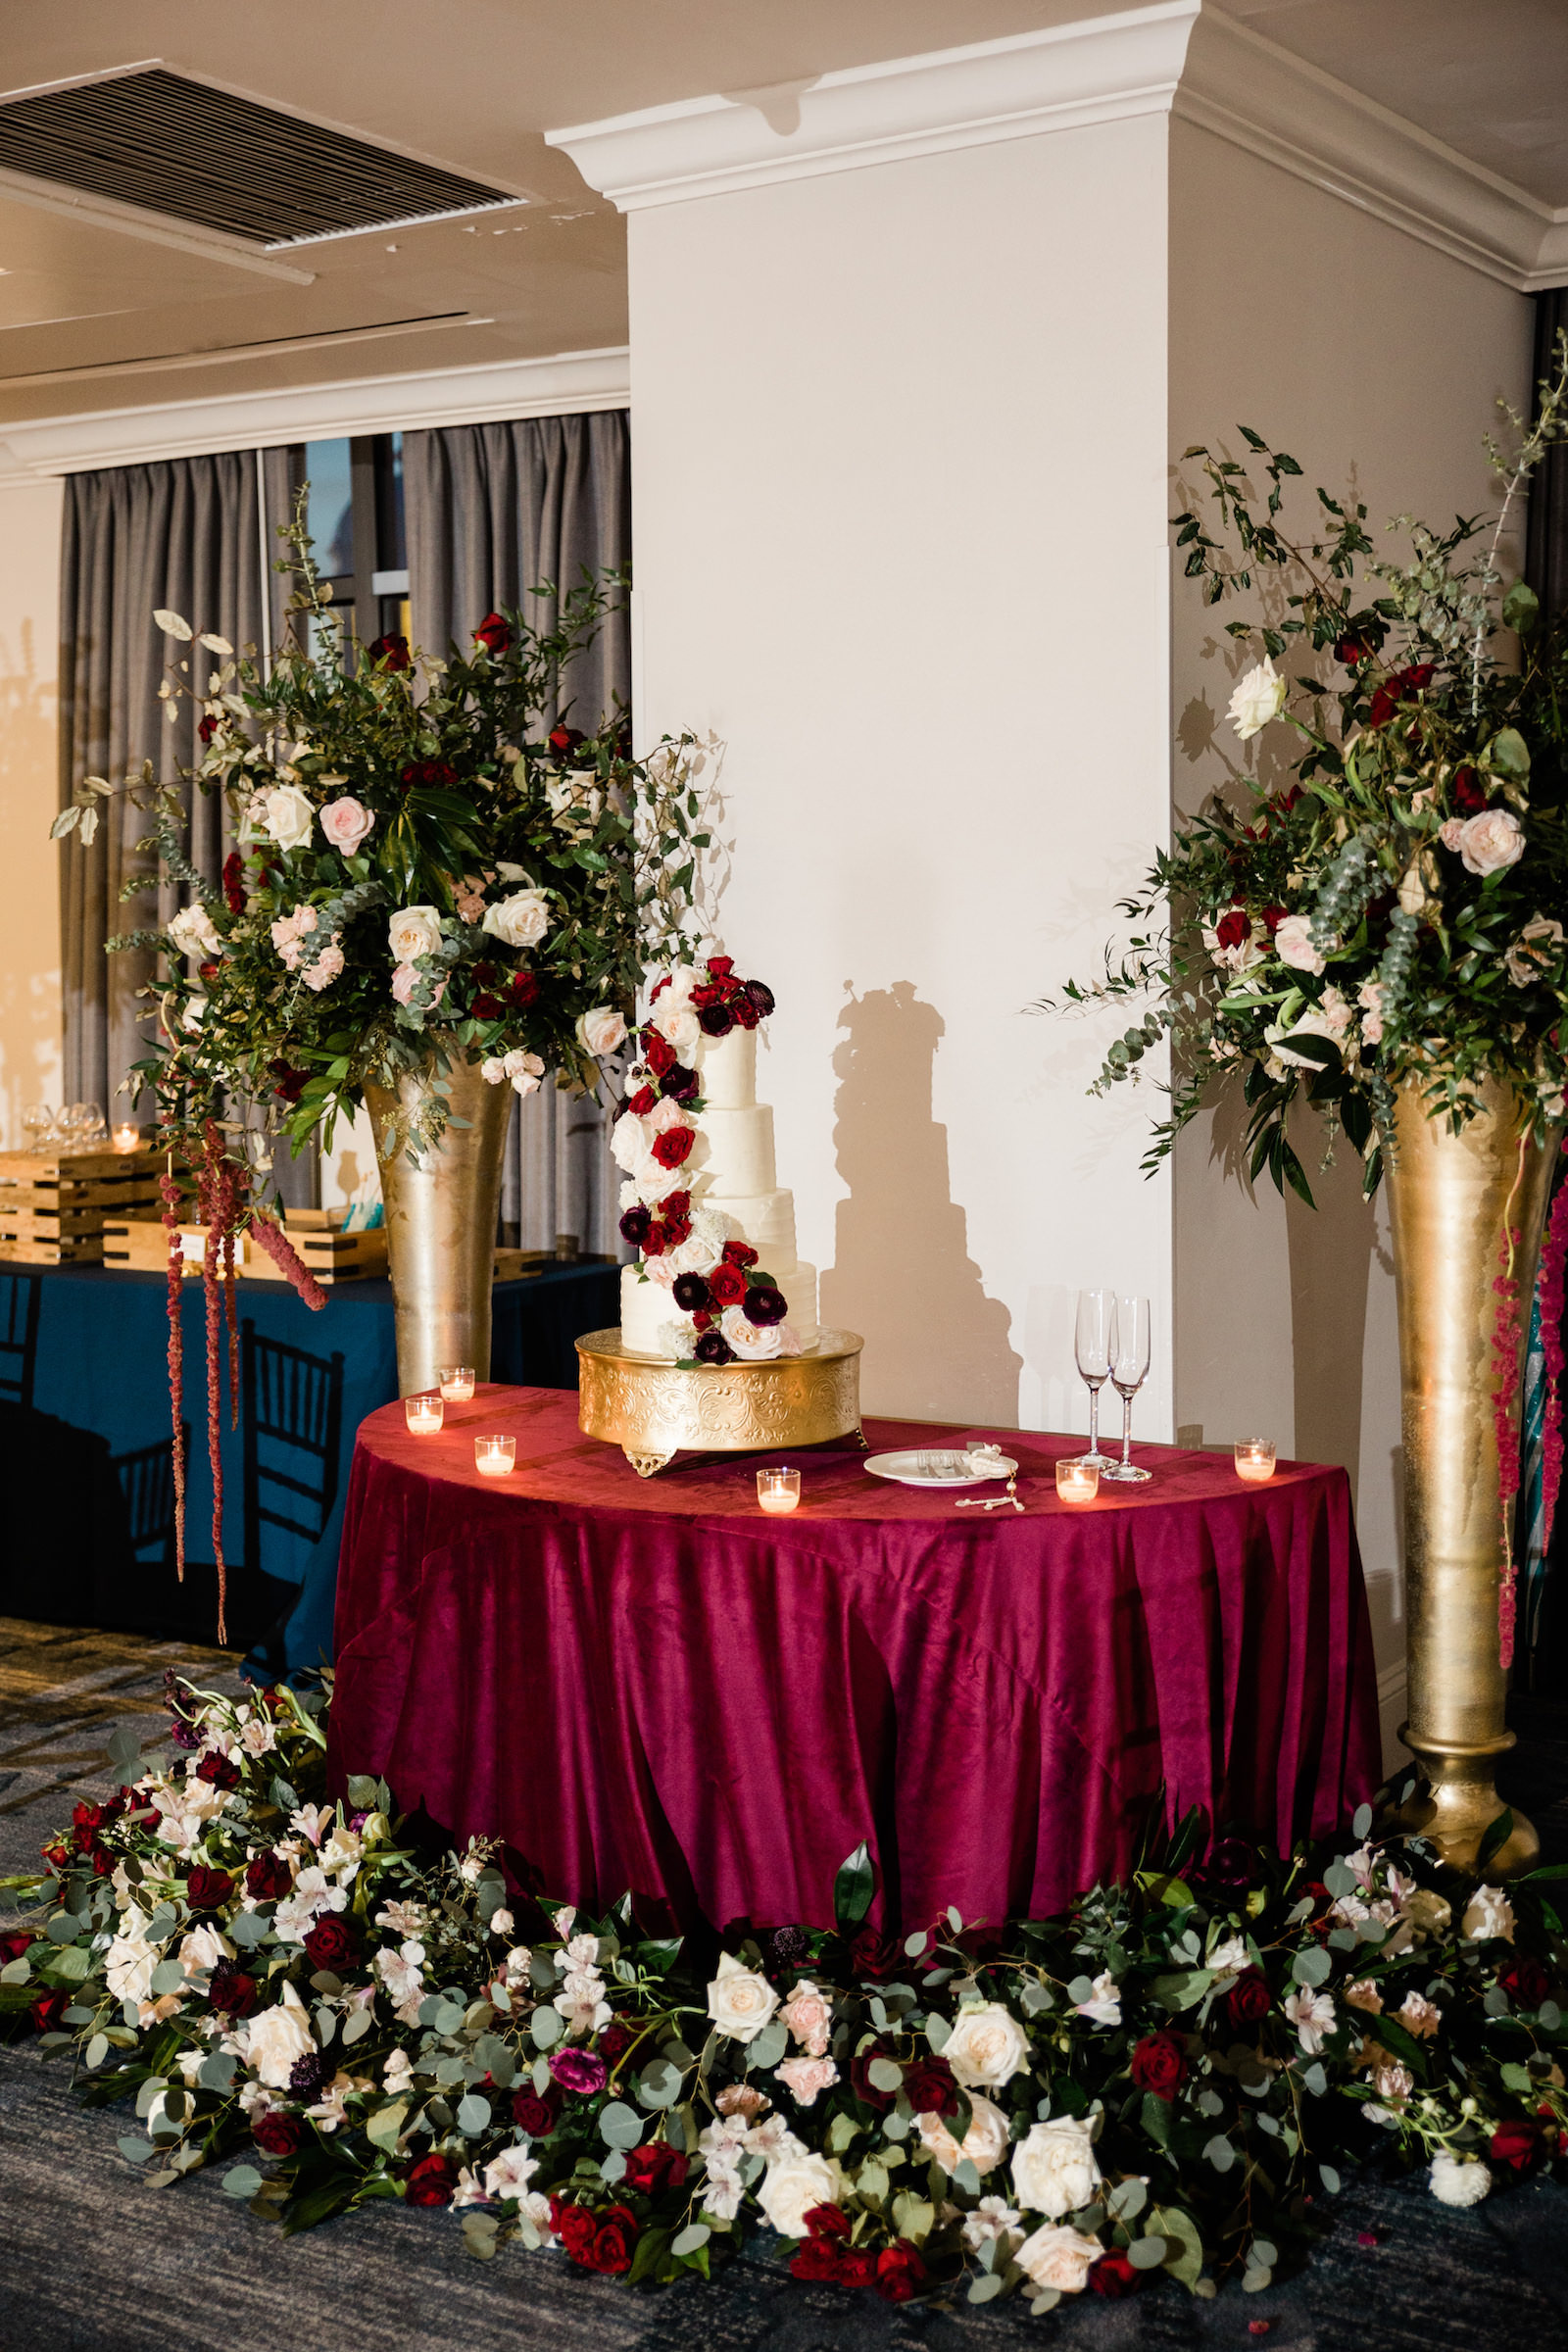 Elegant Navy Wedding Reception Decor, Cake Table with Garnet Linen, Four Tier White Wedding Cake, Tall Gold Stands with Lush Greenery, Blush Pink, Ivory, Red Flowers with Hanging Amaranthus | Tampa Bay Wedding Florist Botanica